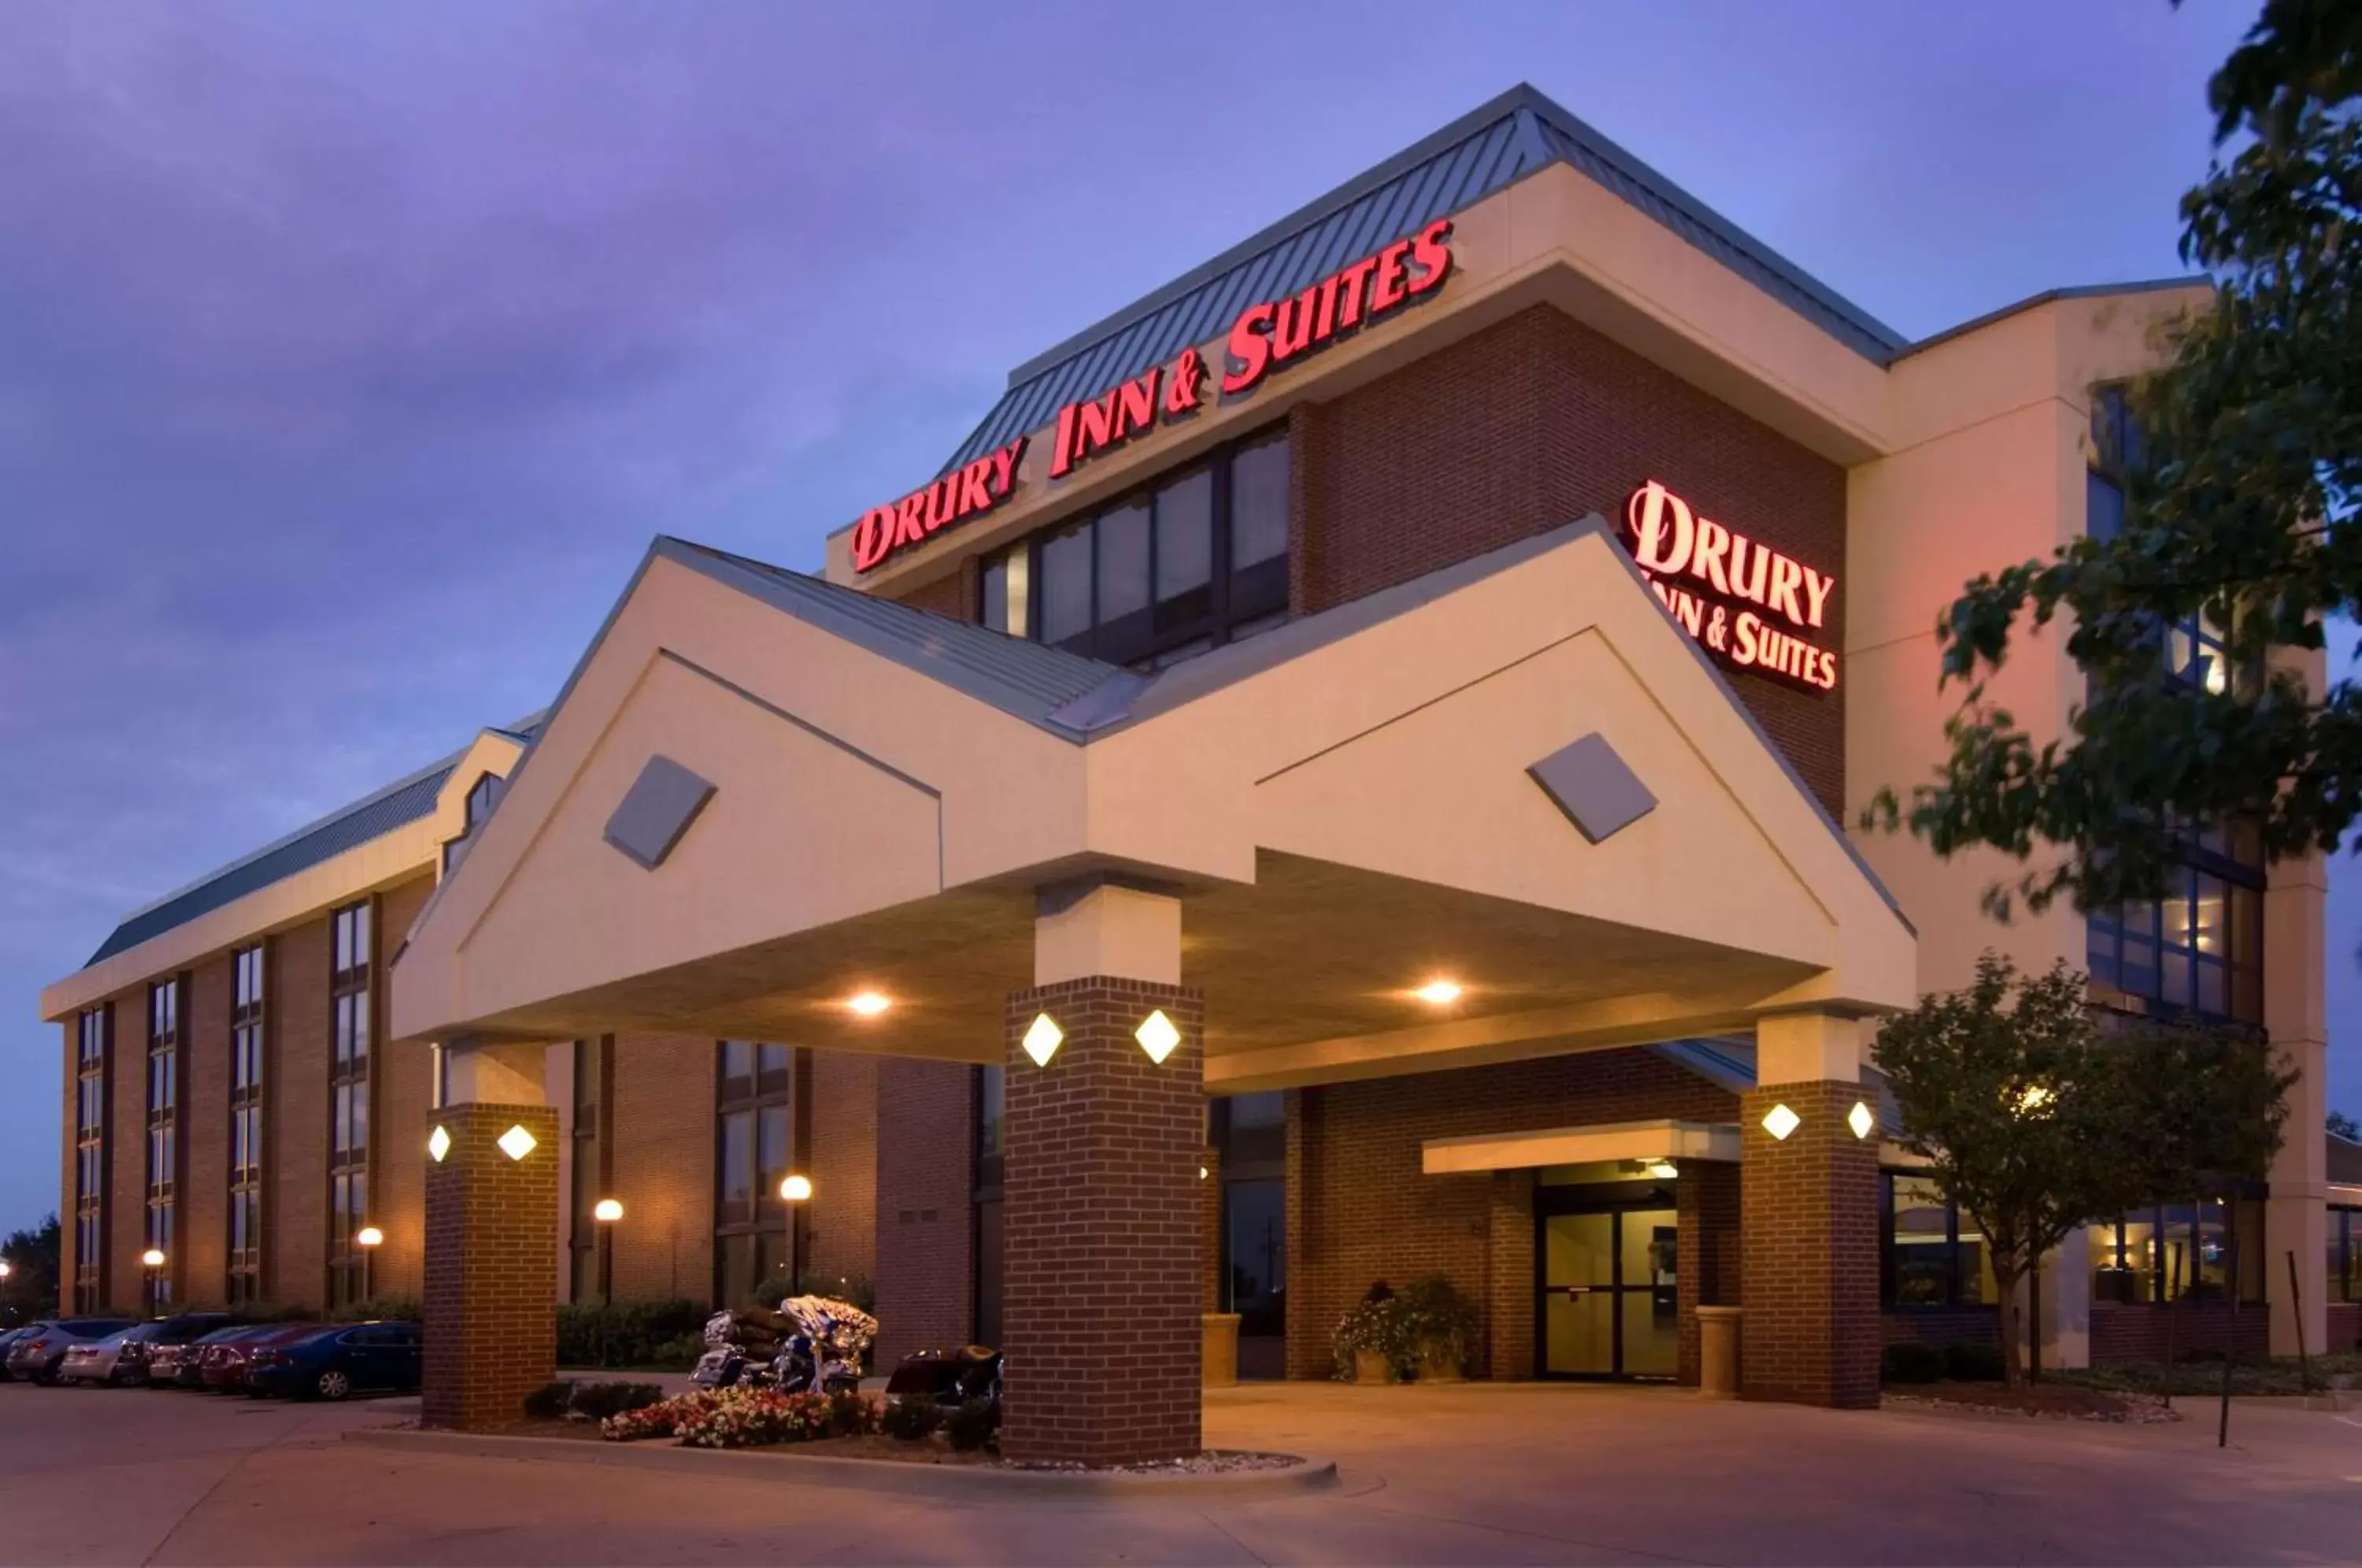 Property building in Drury Inn & Suites Champaign